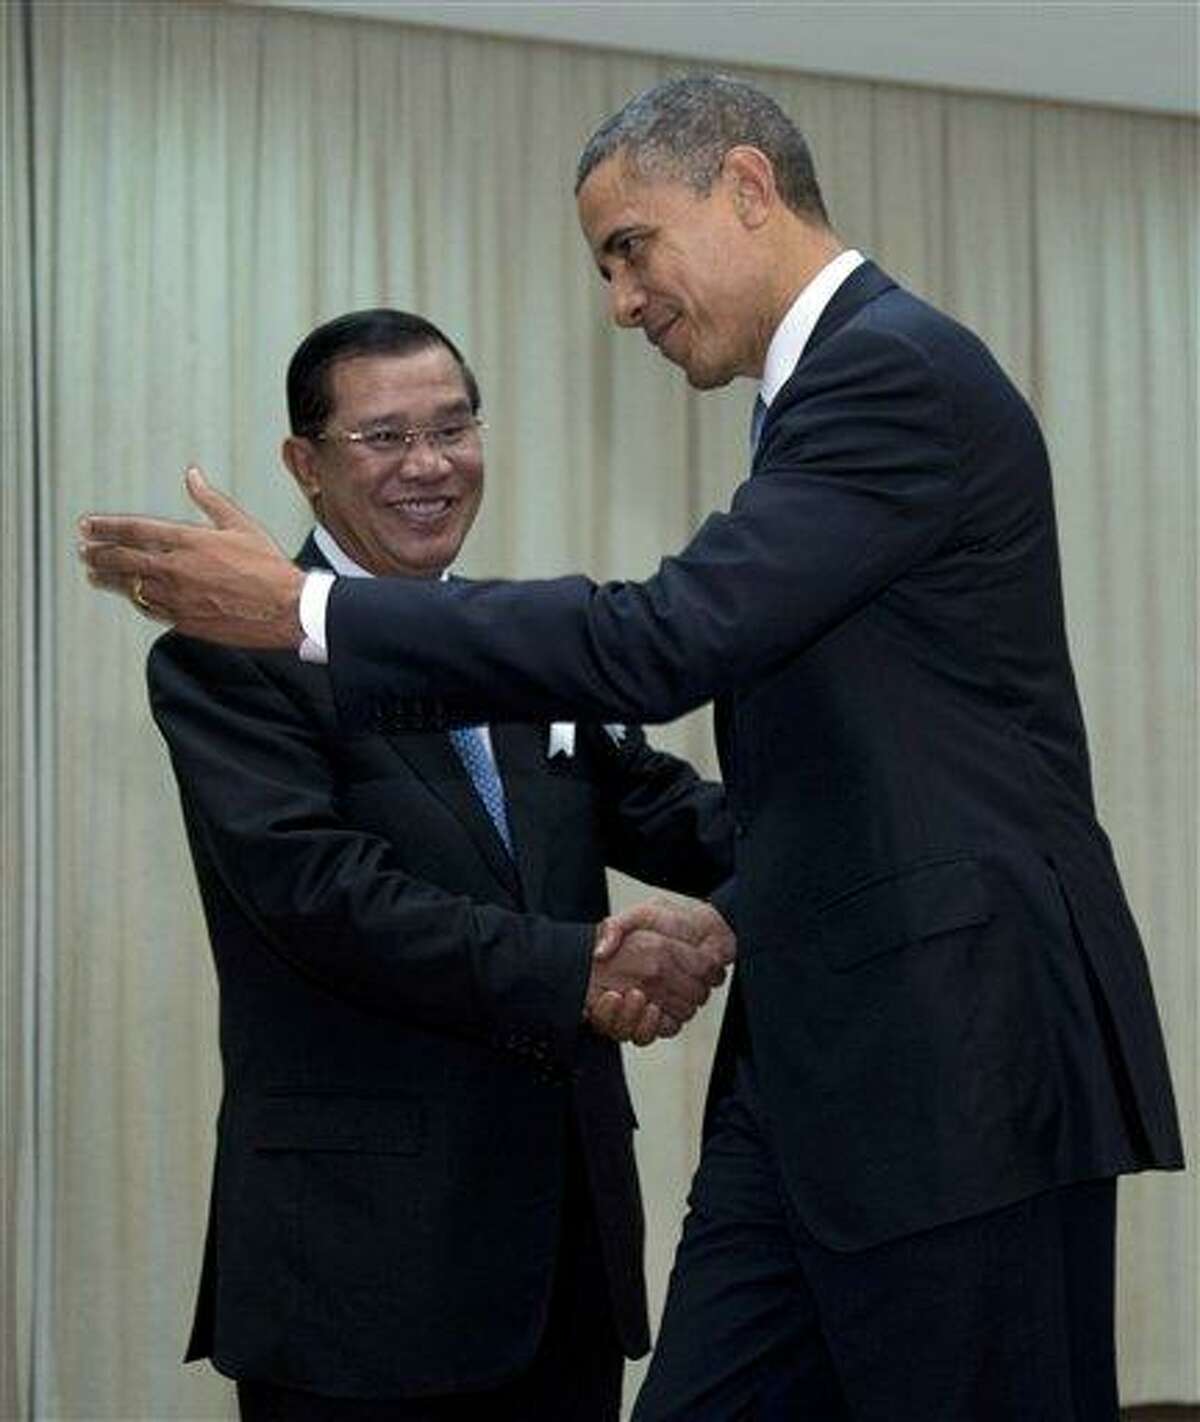 U.S. President Barack Obama is welcomed by Cambodia's Prime Minister Hun Sen as he arrives at the Peace Palace in Phnom Penh, Cambodia, Monday. Obama will attend the East Asia Summit. AP Photo/Carolyn Kaster